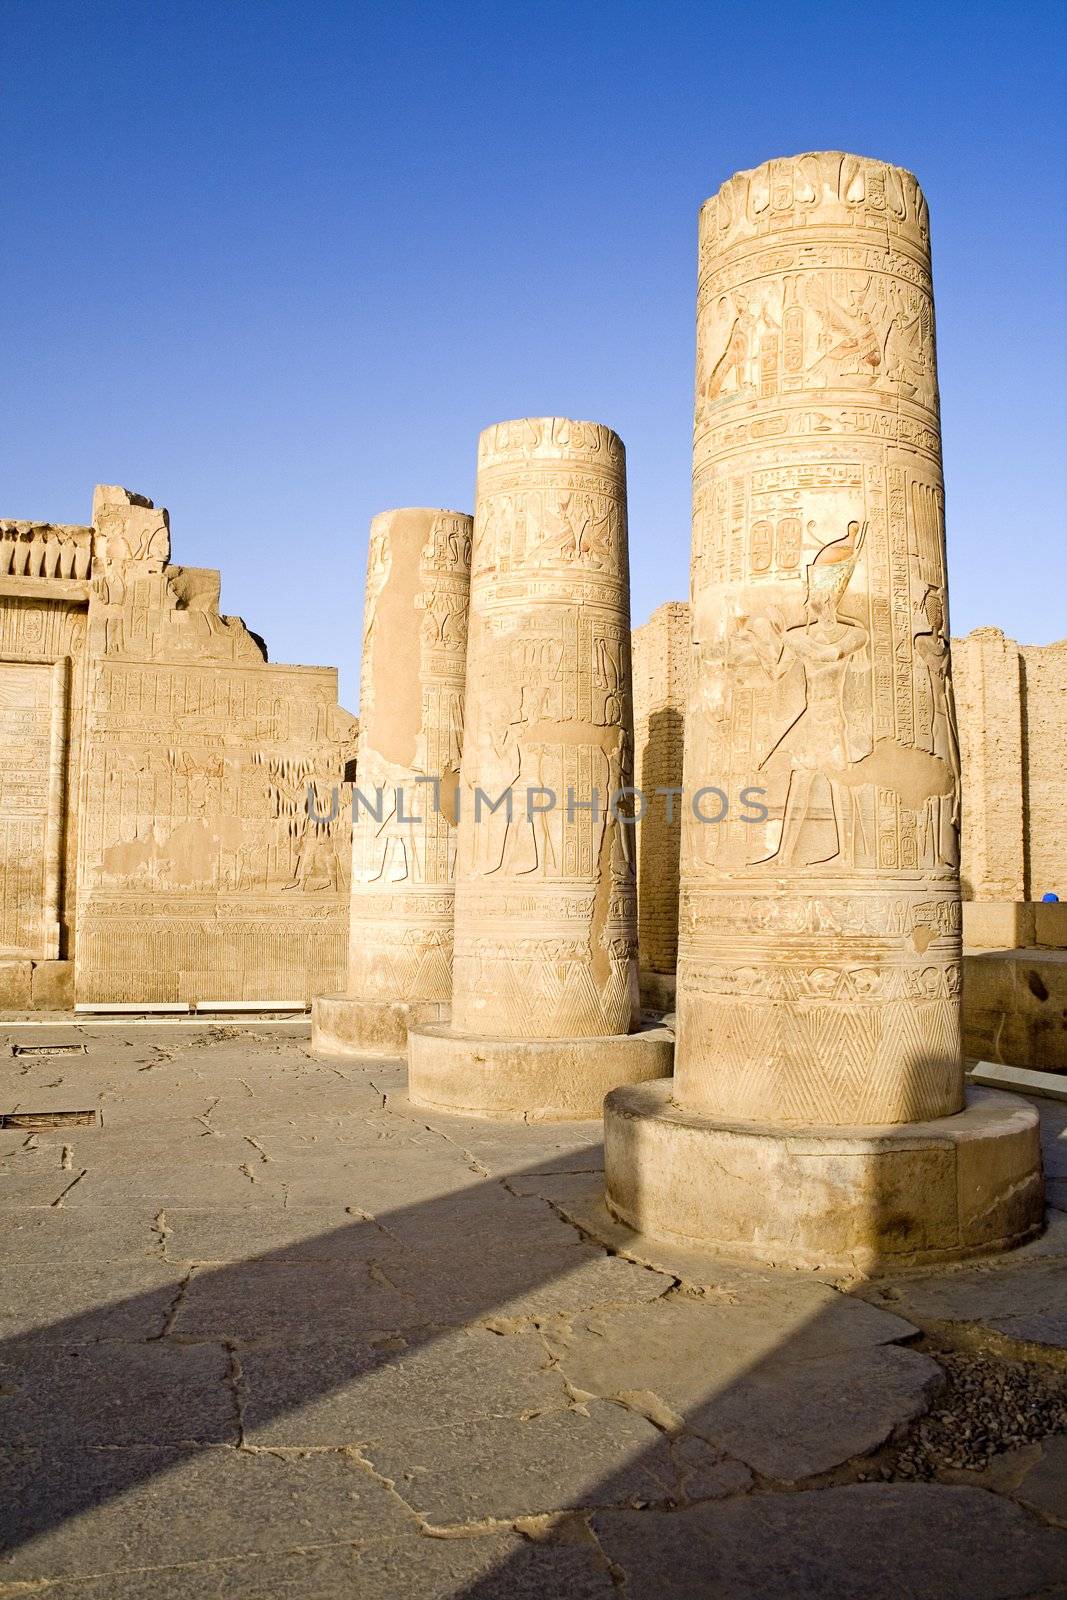 Image of the Temple of Kom Ombo, Egypt.
